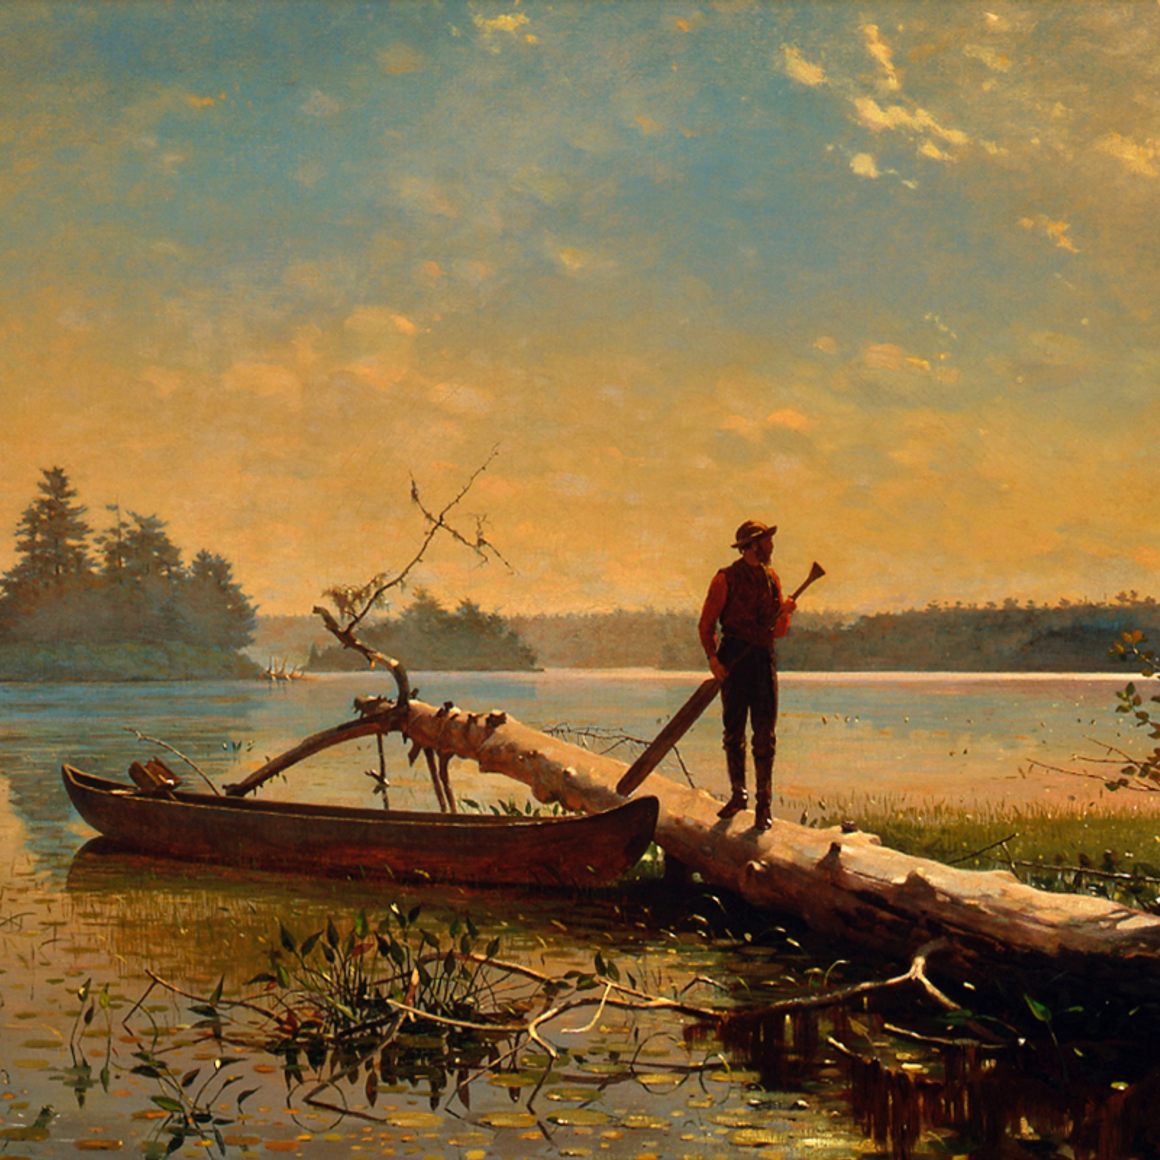 Winslow Homer, An Adirondack Lake, 1870. Oil on canvas. Henry Art Gallery, University of Washington, Seattle, Horace C. Henry Collection, 26.71.